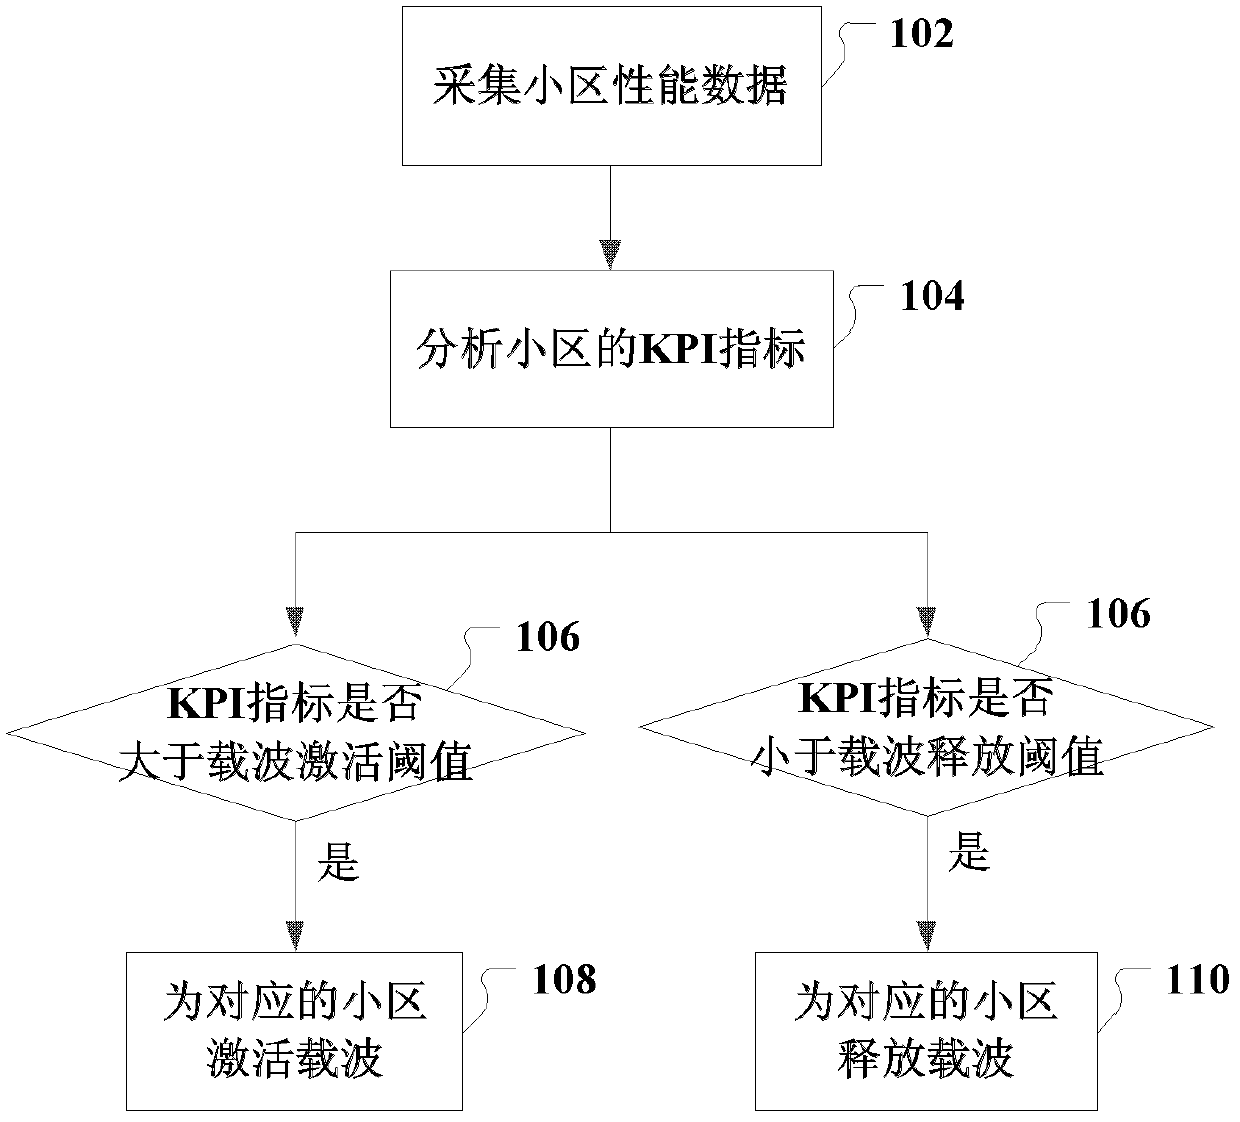 Carrier wave scheduling method and system